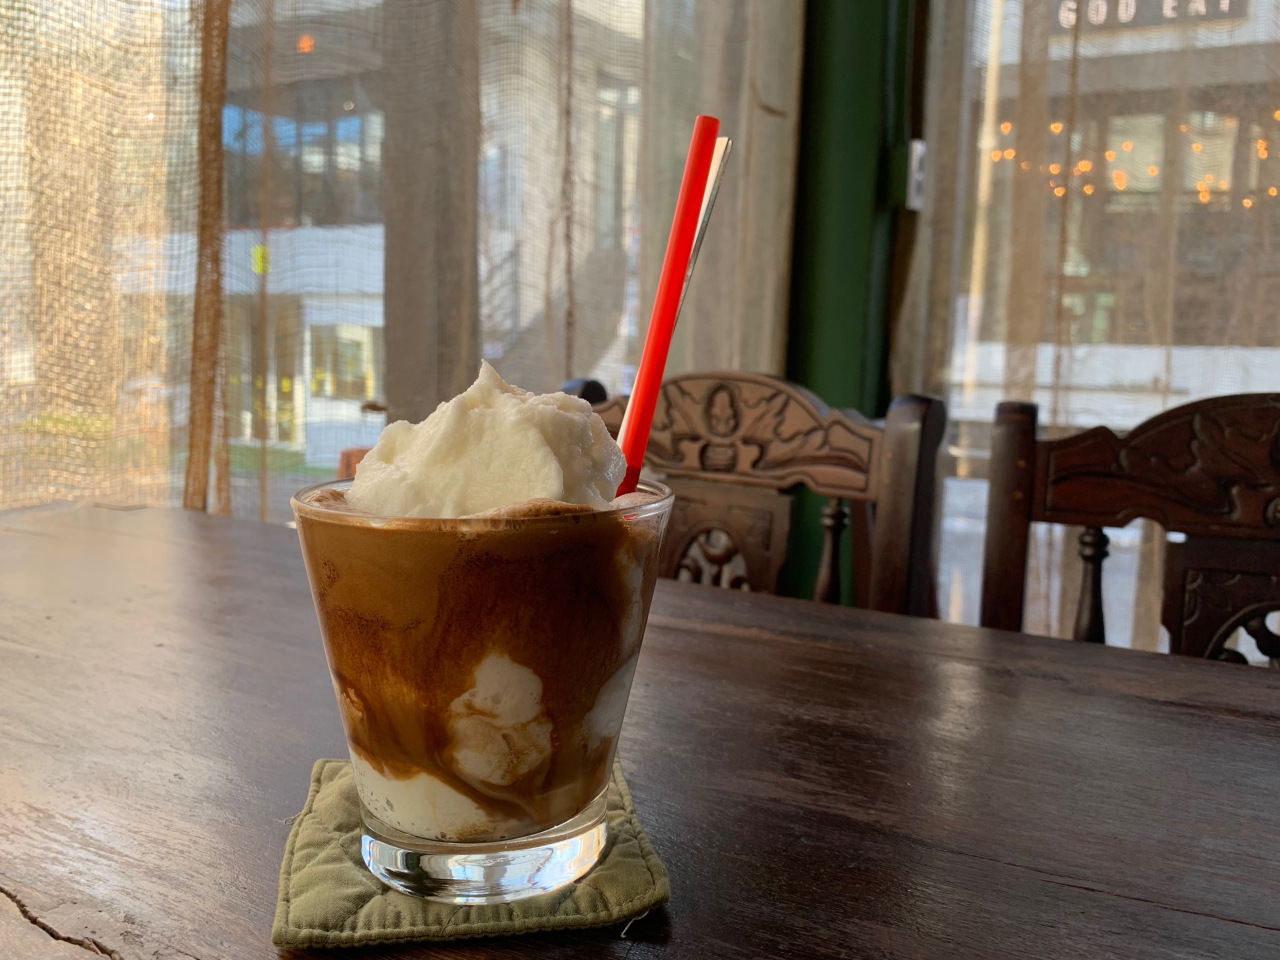 Coconut Smoothie Coffee at Cong Caphe (Im Eun-byel/The Korea Herald)